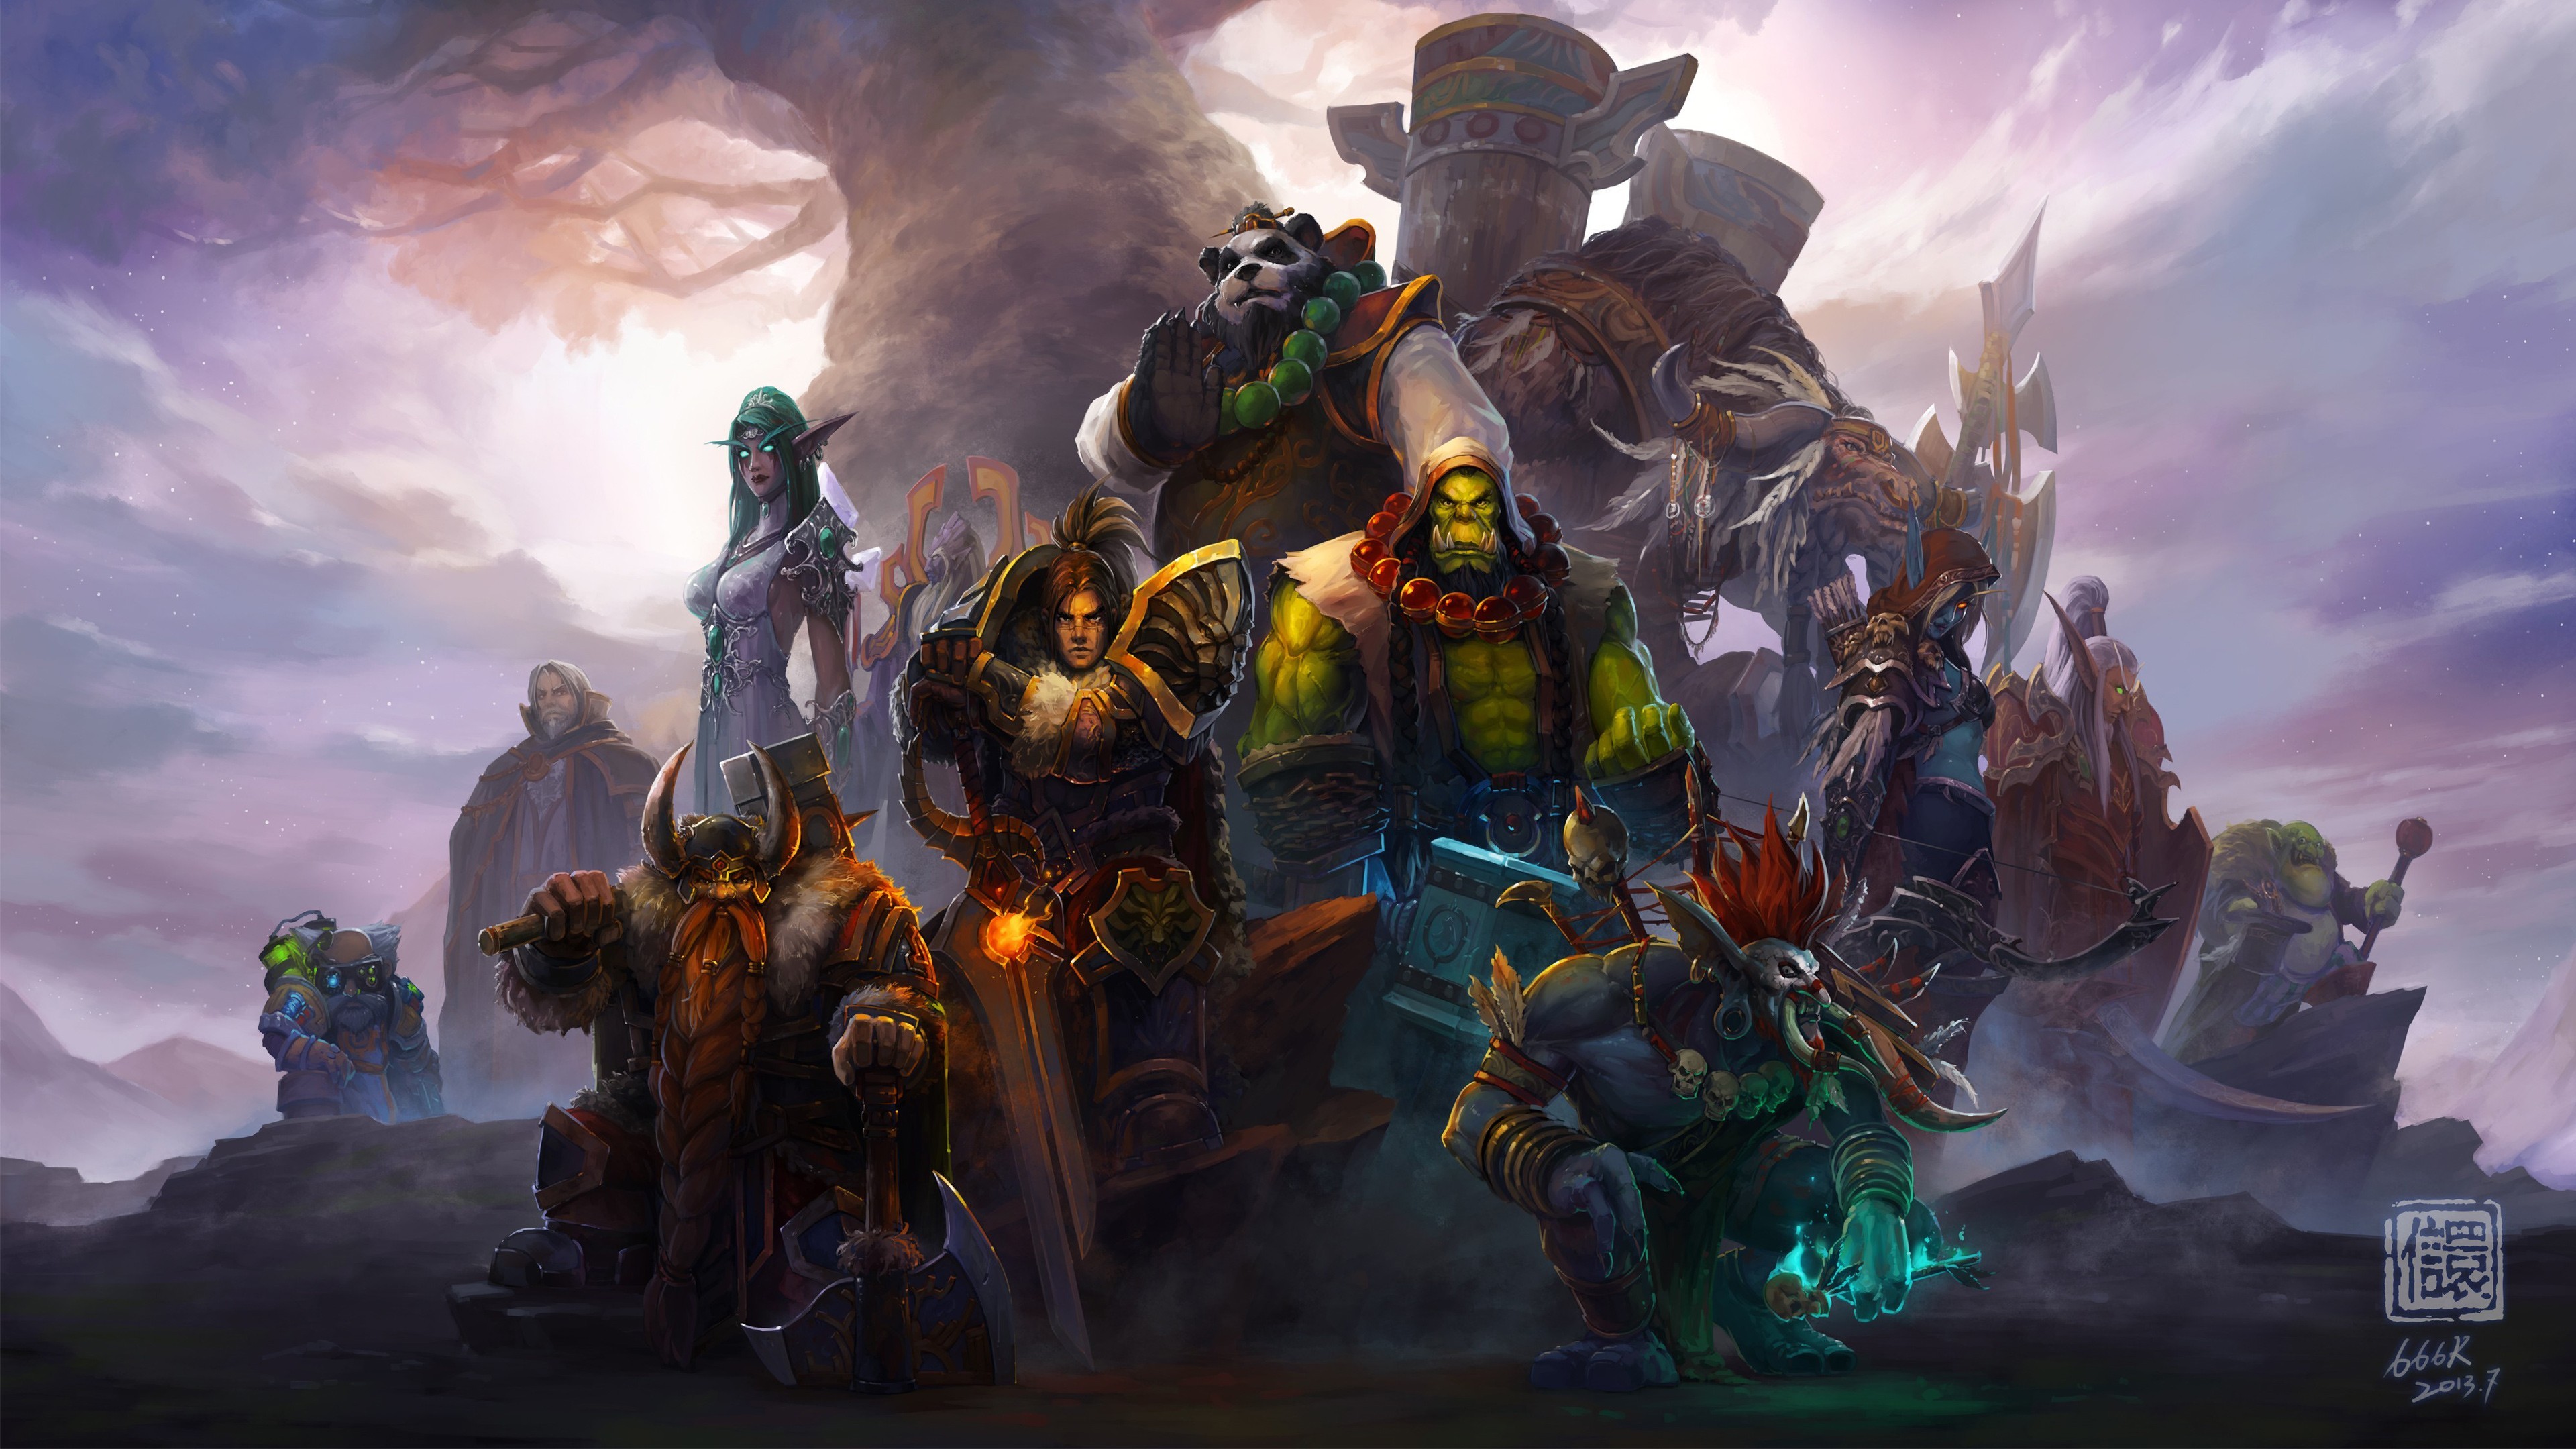 world_of_warcraft_characters_4k-3840x2160.jpg